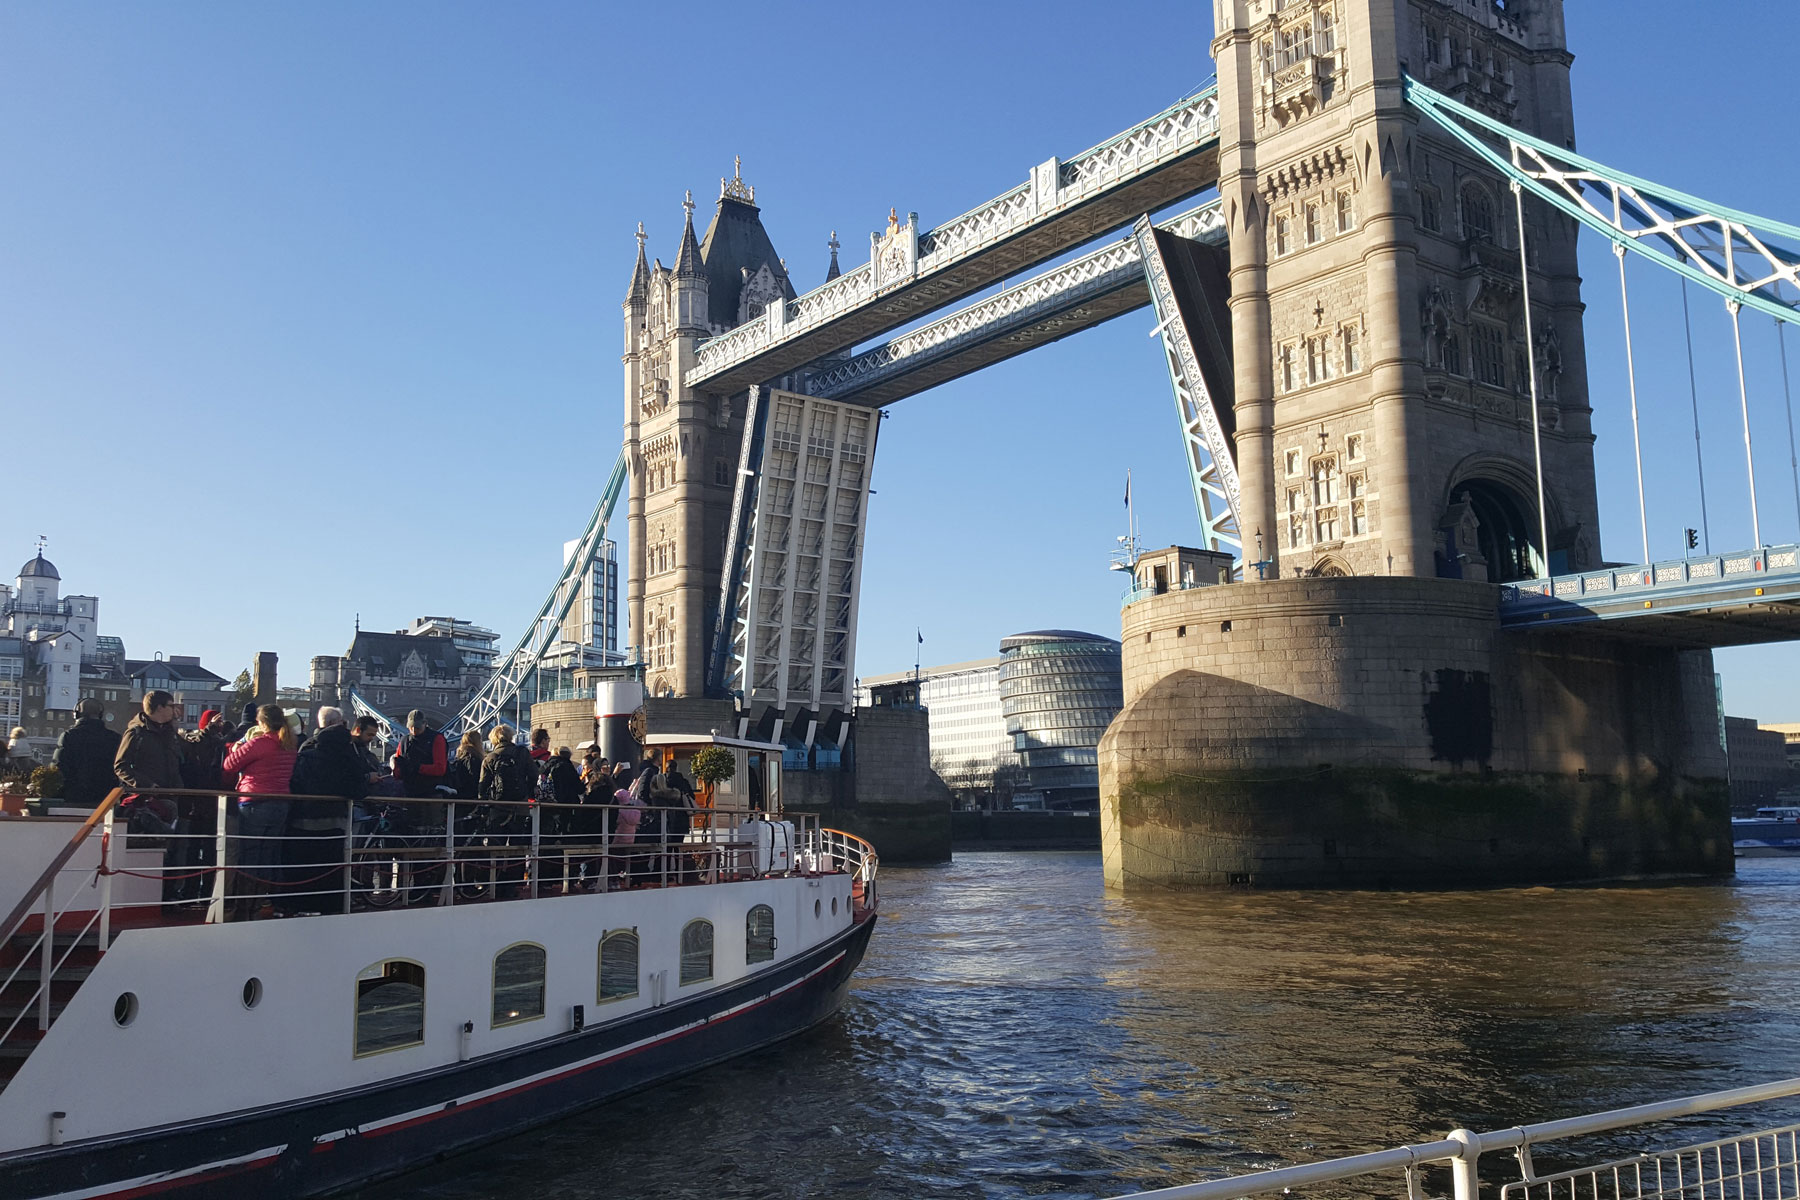 Catching the Tower Bridge free ferry – IanVisits